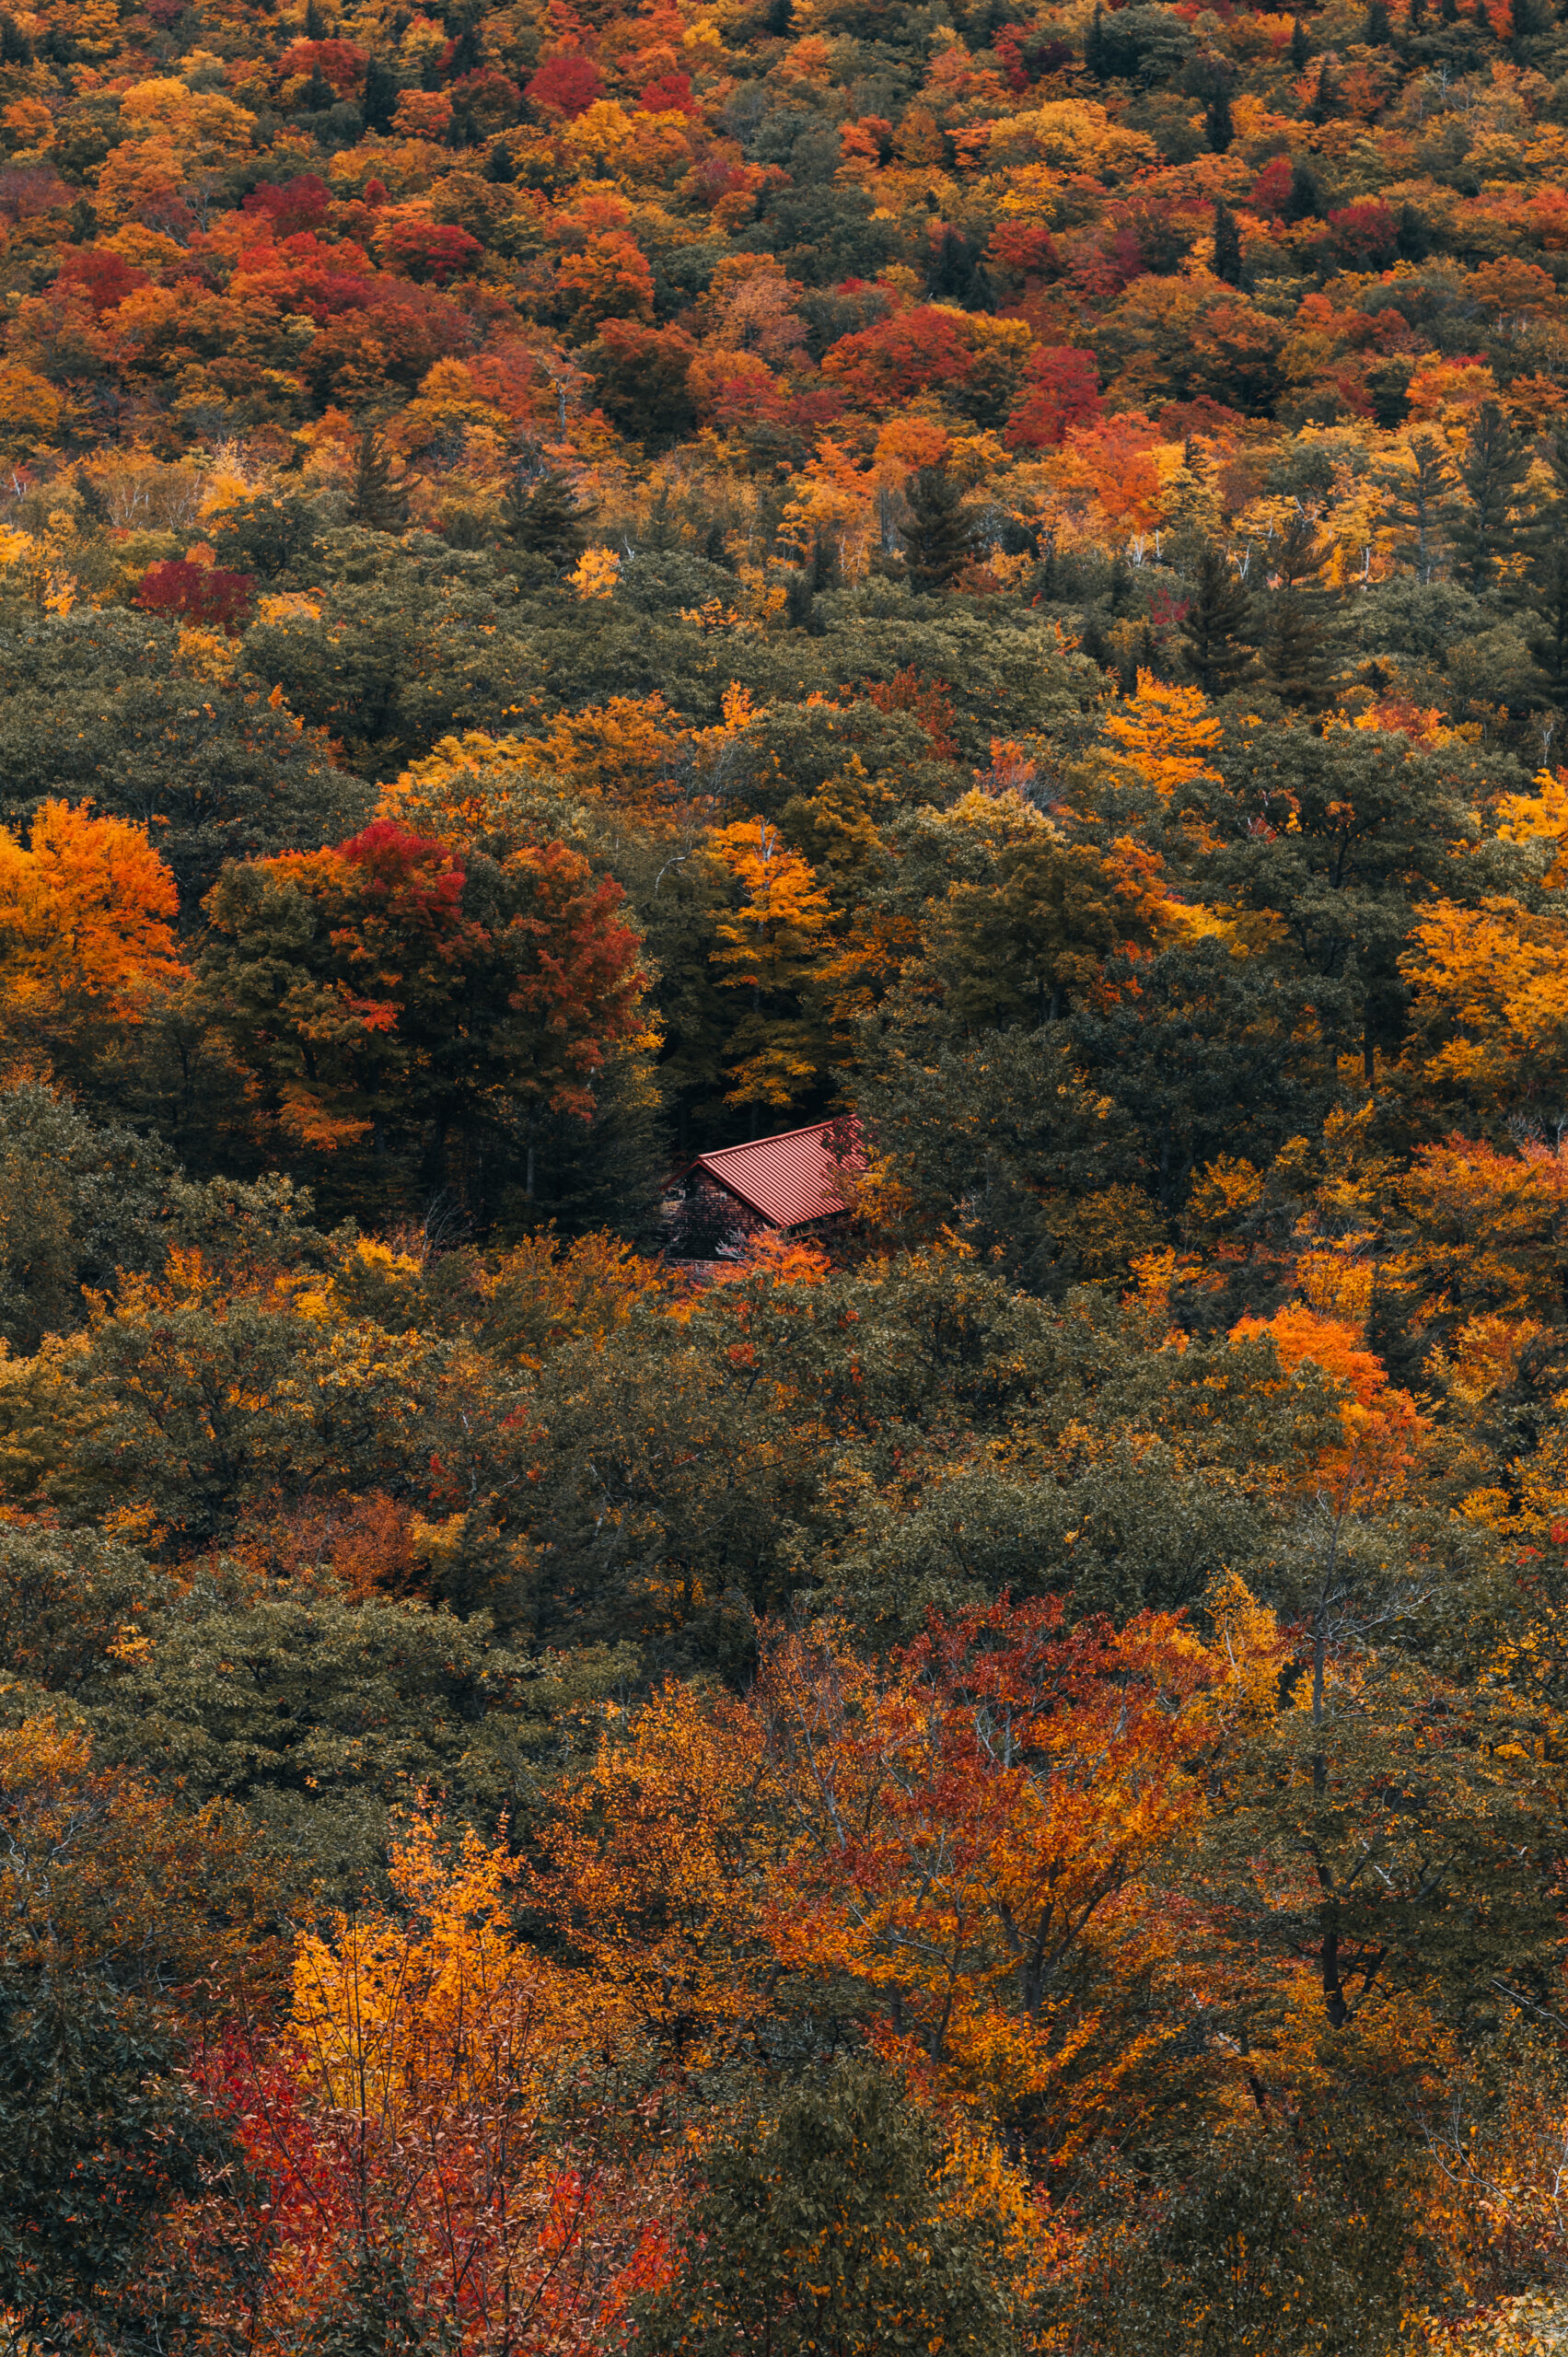 A beautiful scene with a cabin in the colorful autumn foliage, New Hampshire, USA